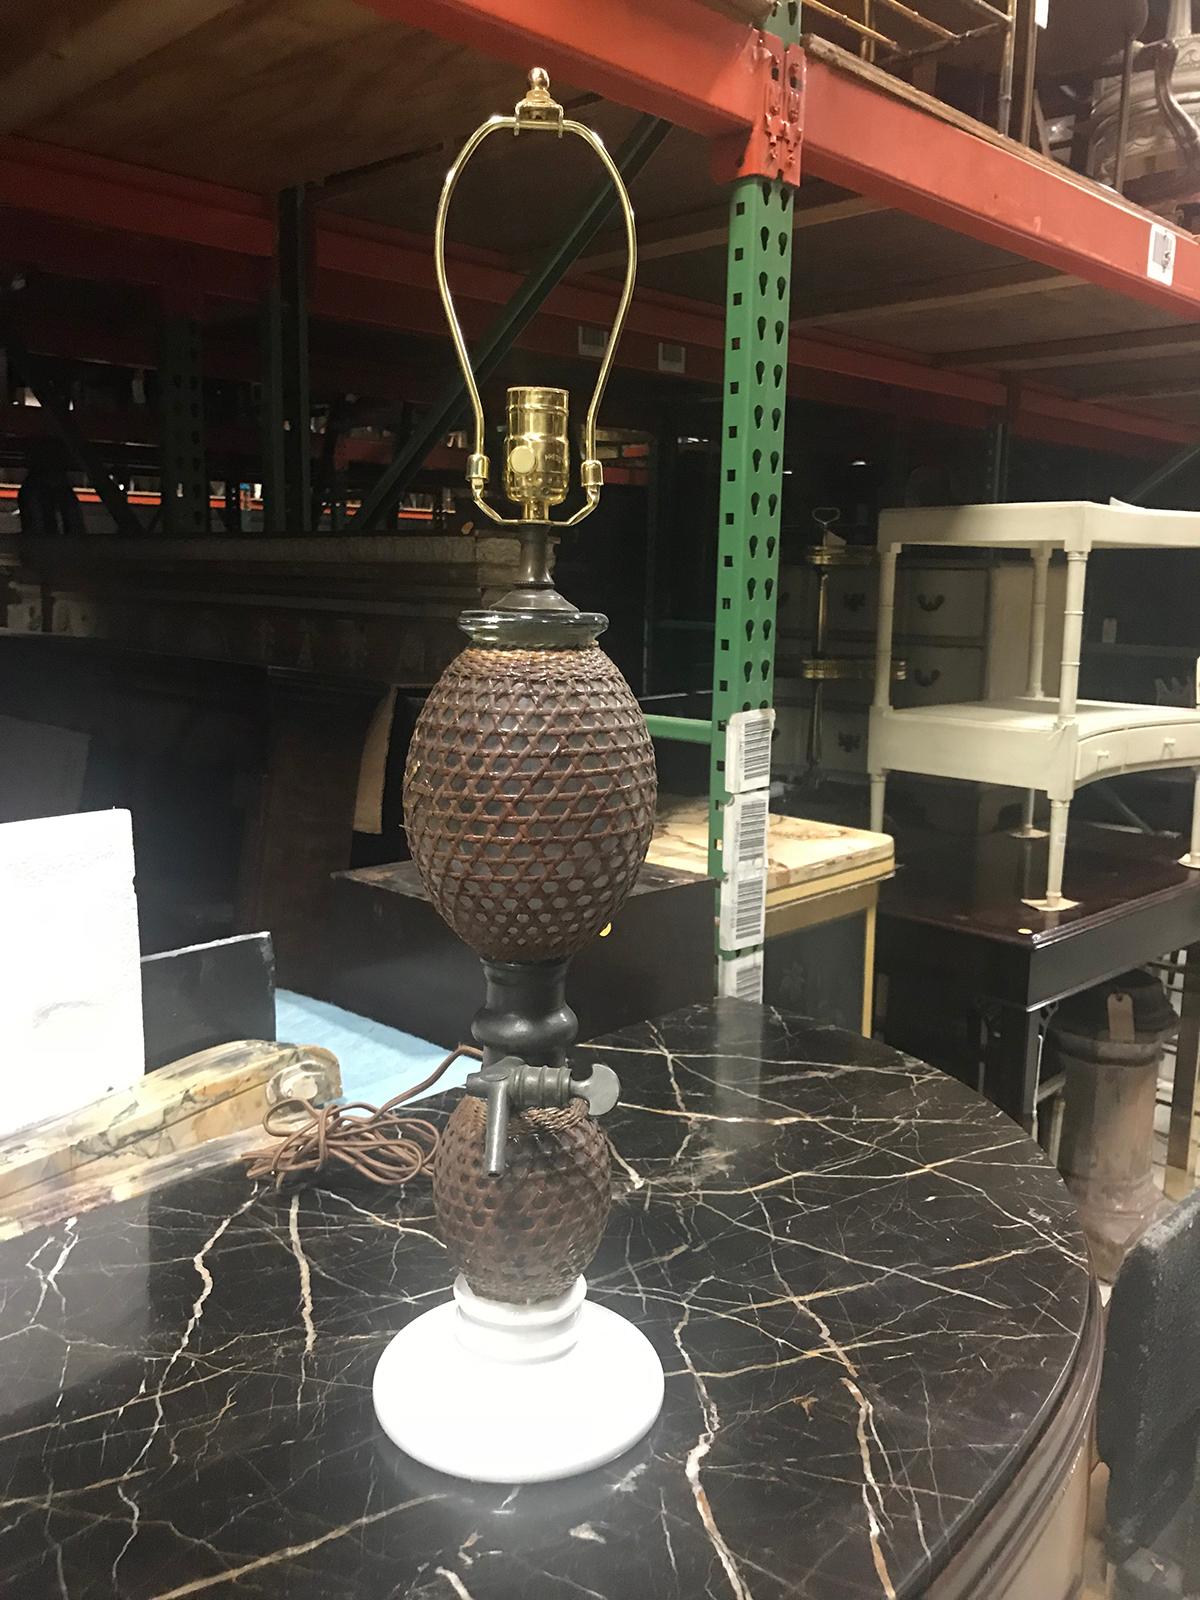 20th century rattan covered glass seltzer bottle as lamp, white ceramic base, pewter spout
New wiring.